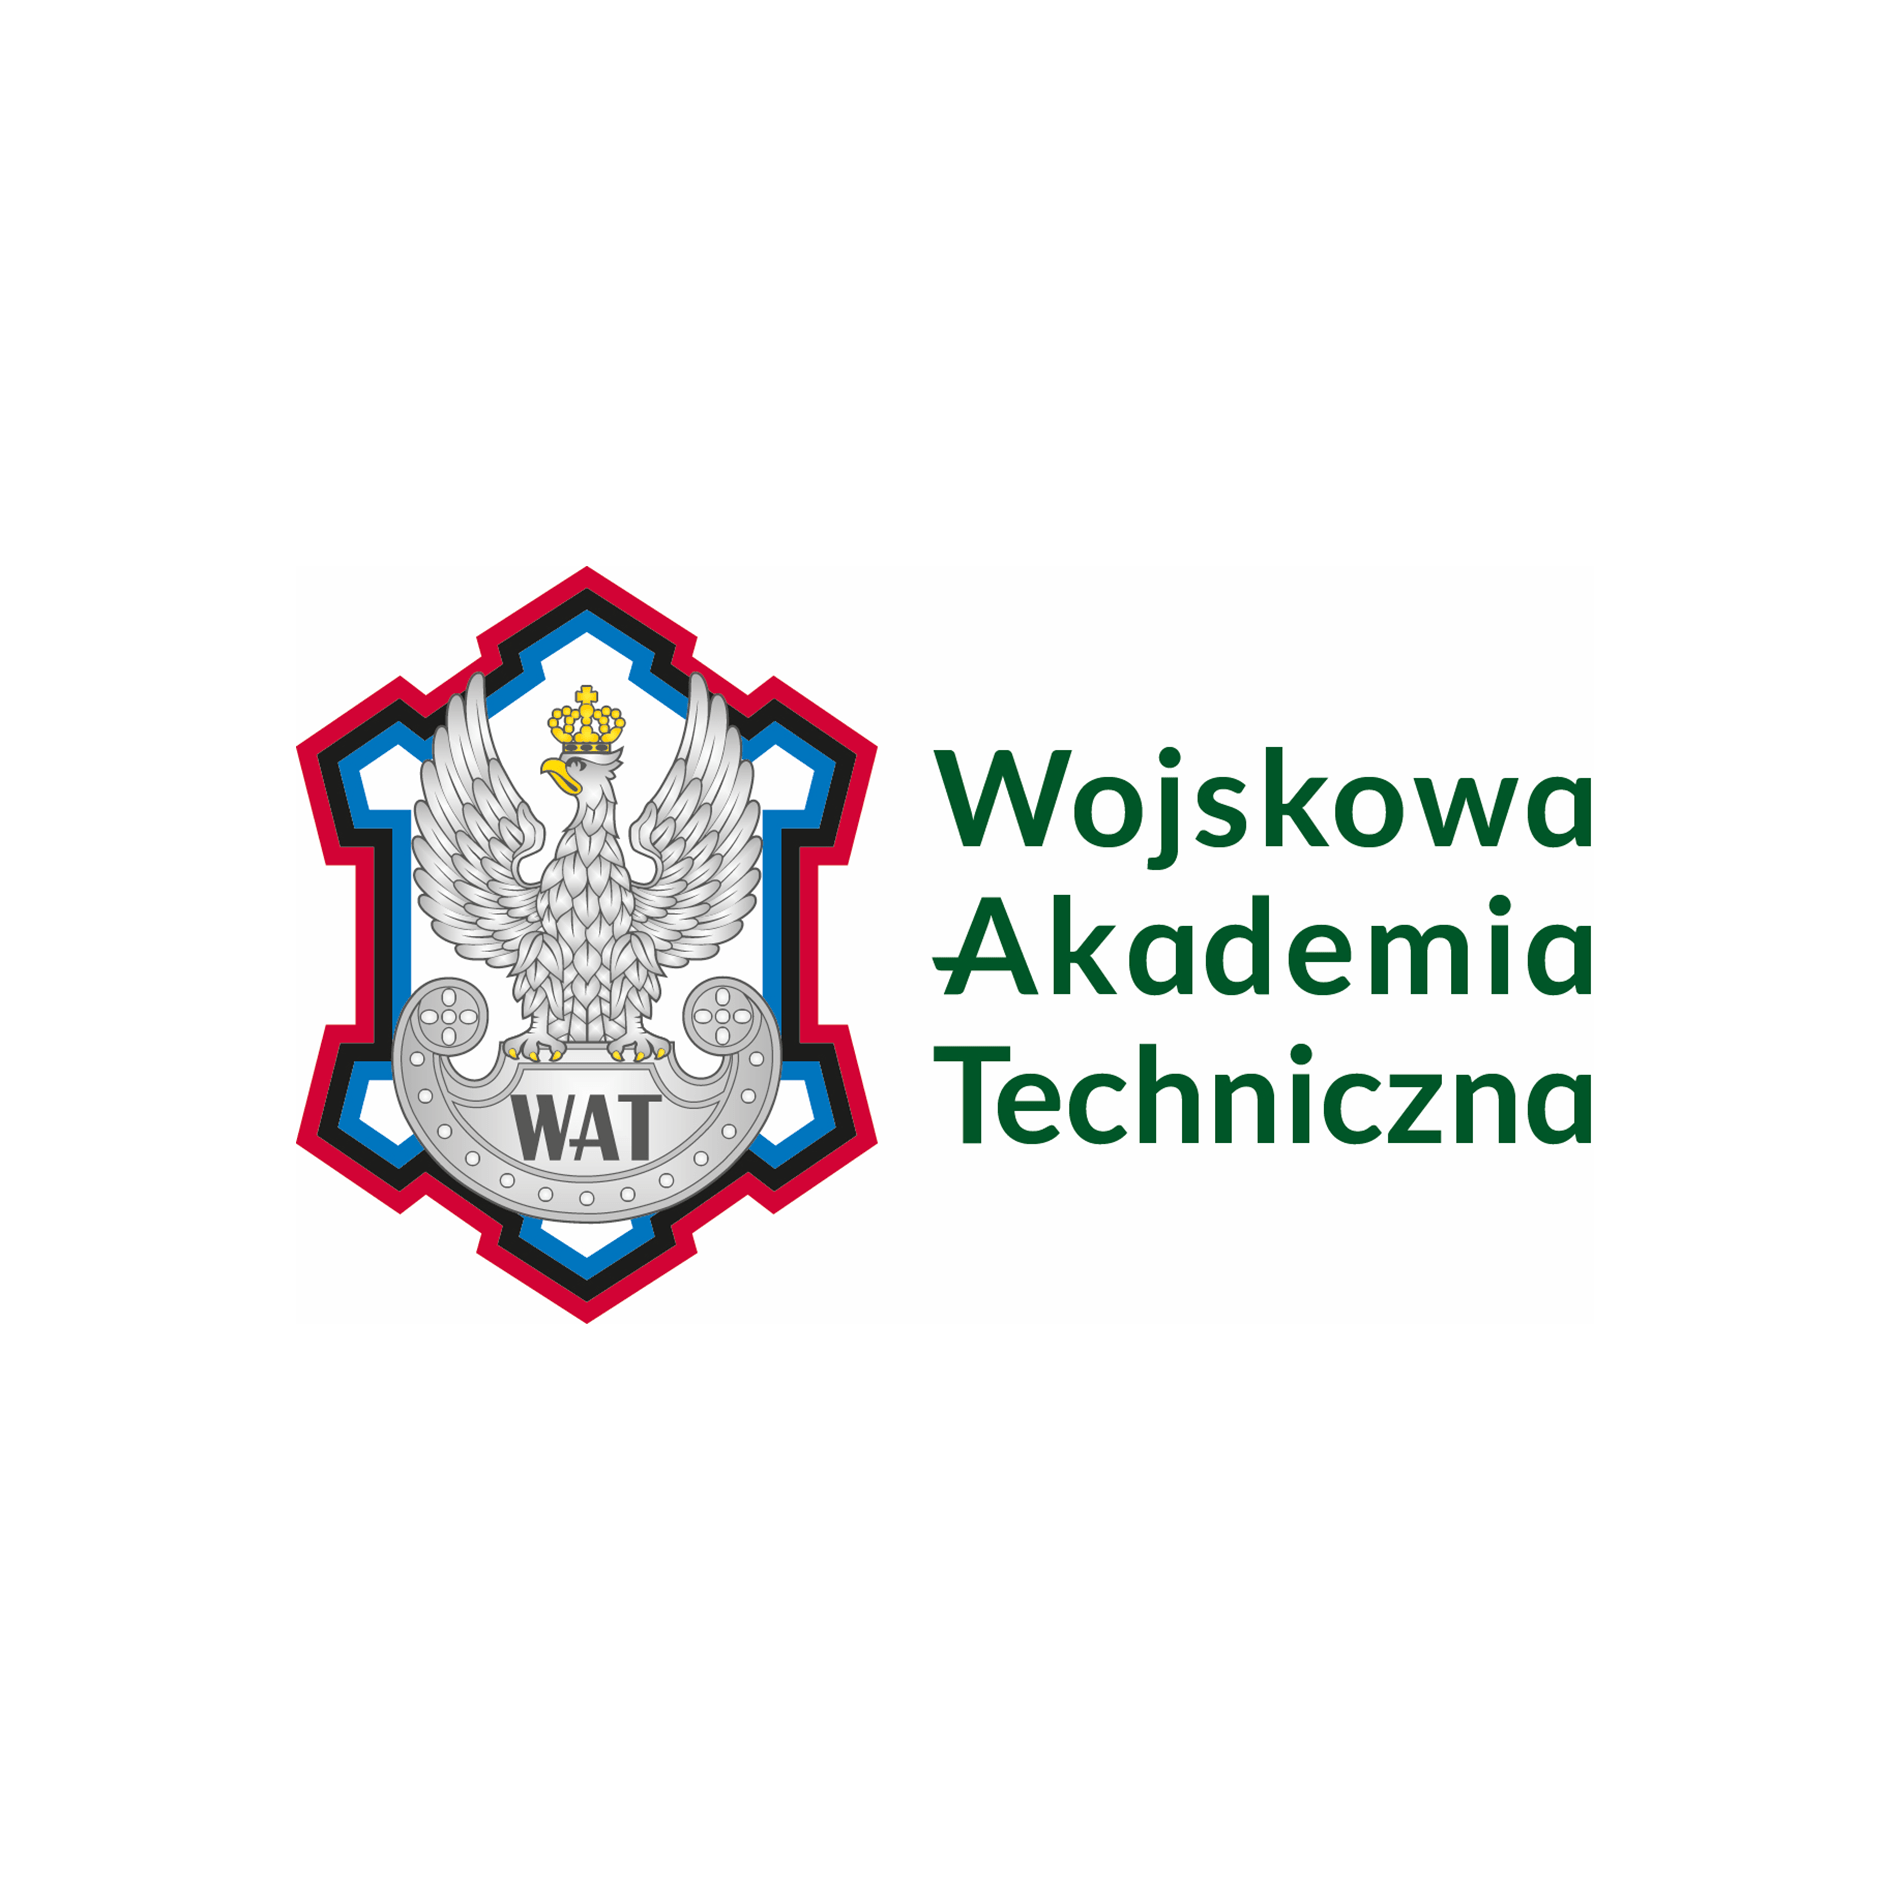 MILITARY UNIVERSITY OF TECHNOLOGY (MUT) is an open technical university educating officer cadets and students and conducting R&D